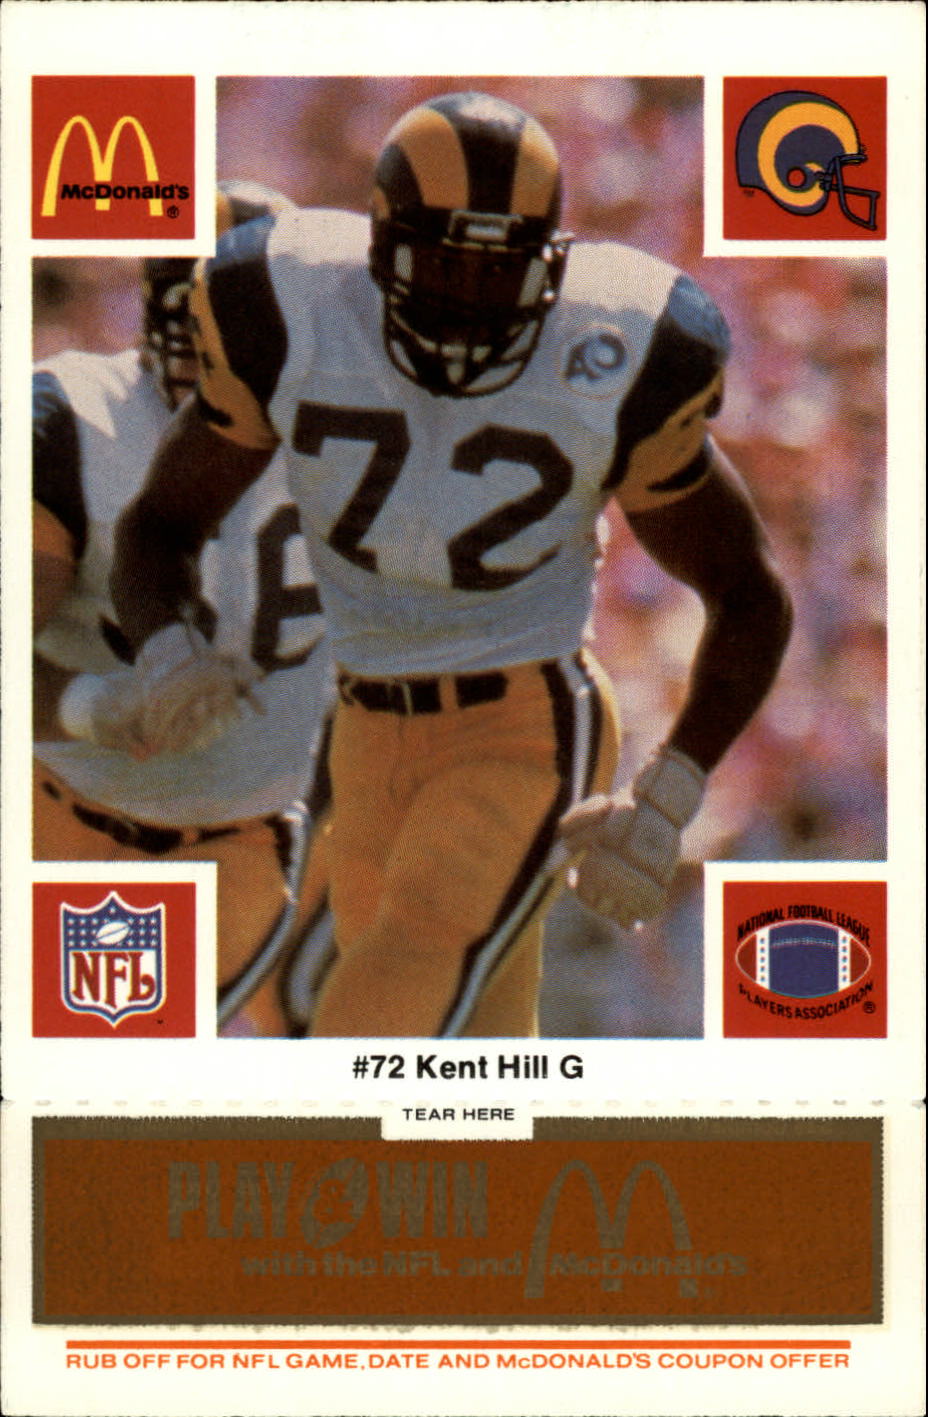  Kent Hill player image